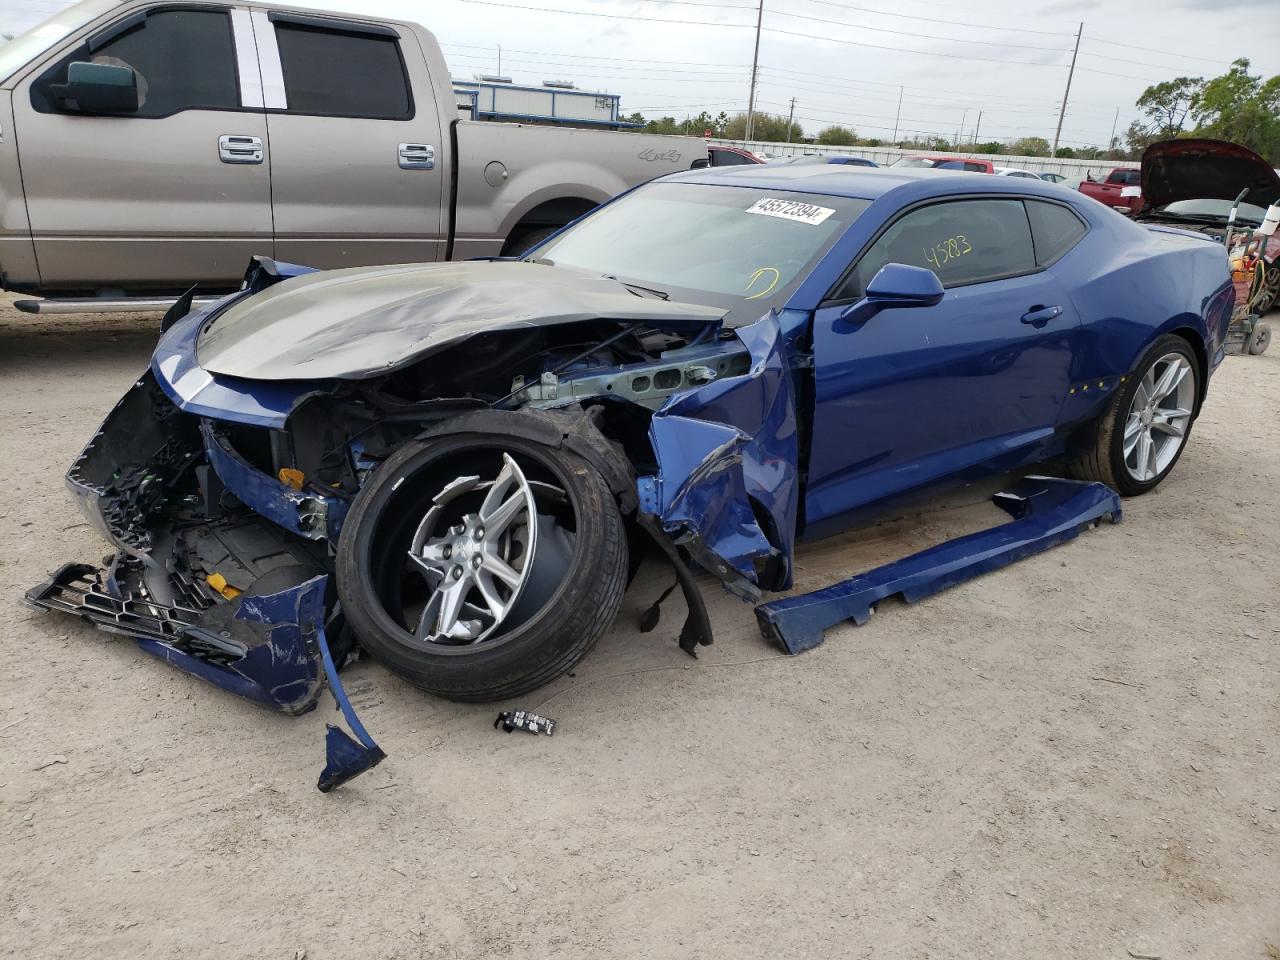 vin: 1G1FB1RS5K0113193 1G1FB1RS5K0113193 2019 chevrolet camaro 3600 for Sale in 33578 7610, Fl - Tampa South, Riverview, USA